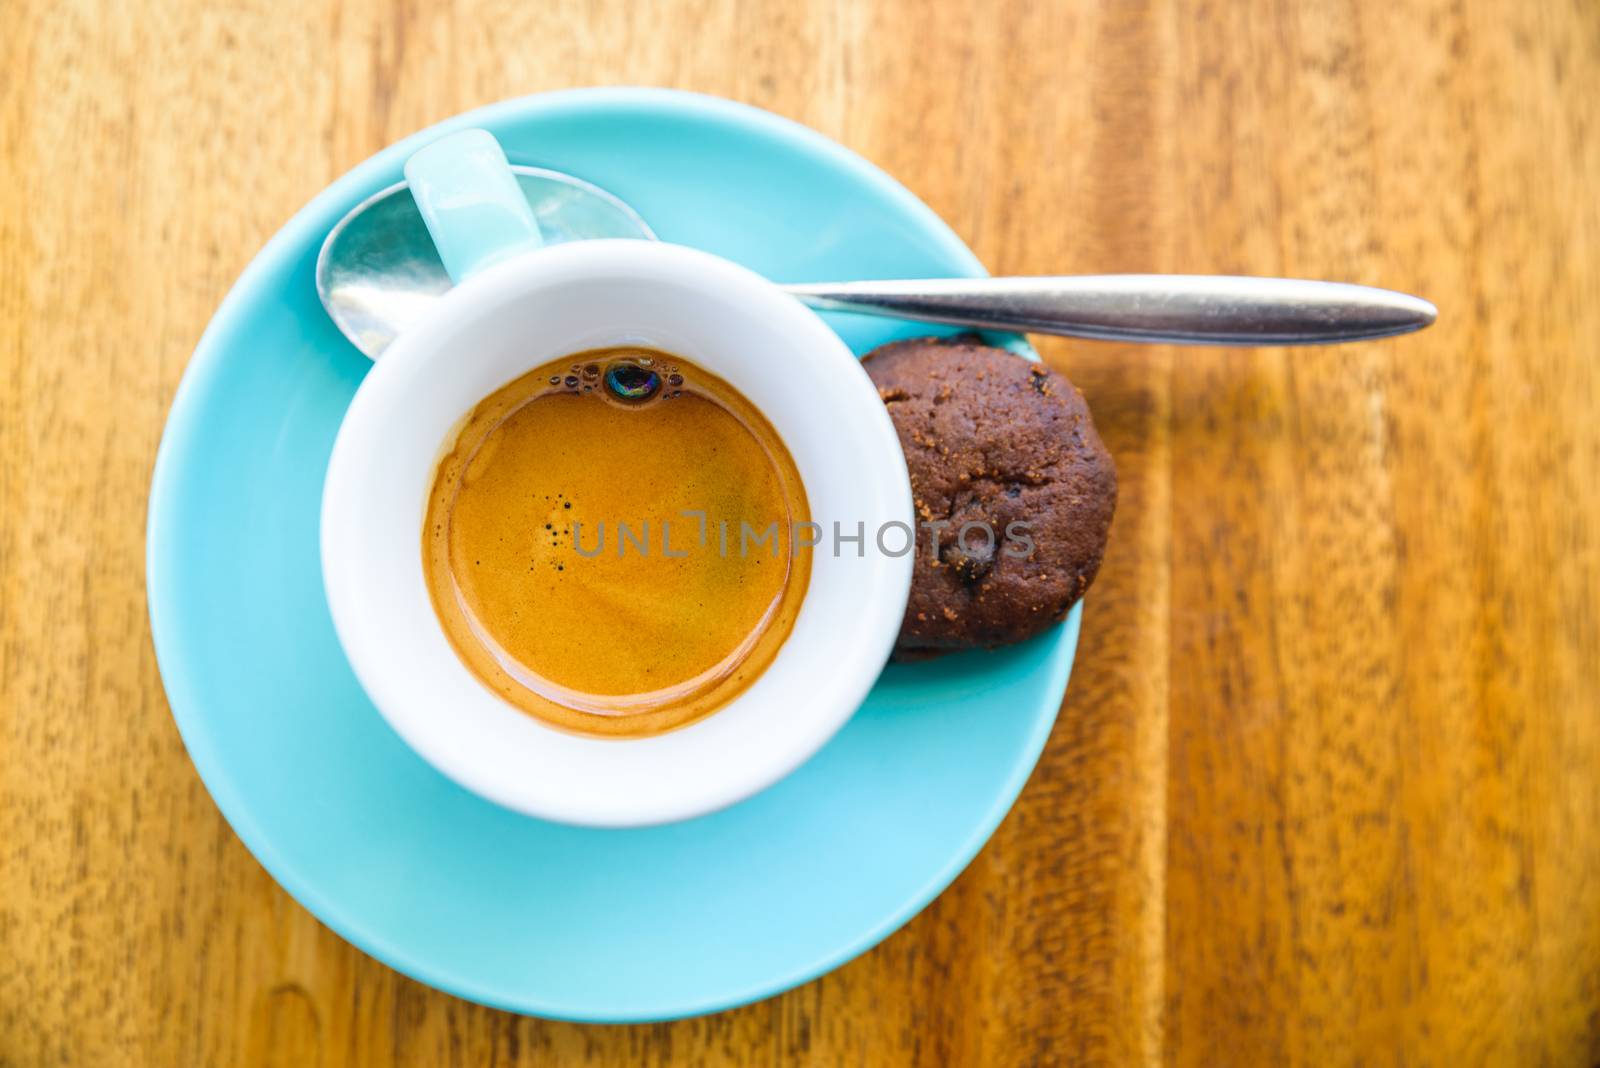 An espresso served with a chocolate cookie in a turquoise cup on a wood table